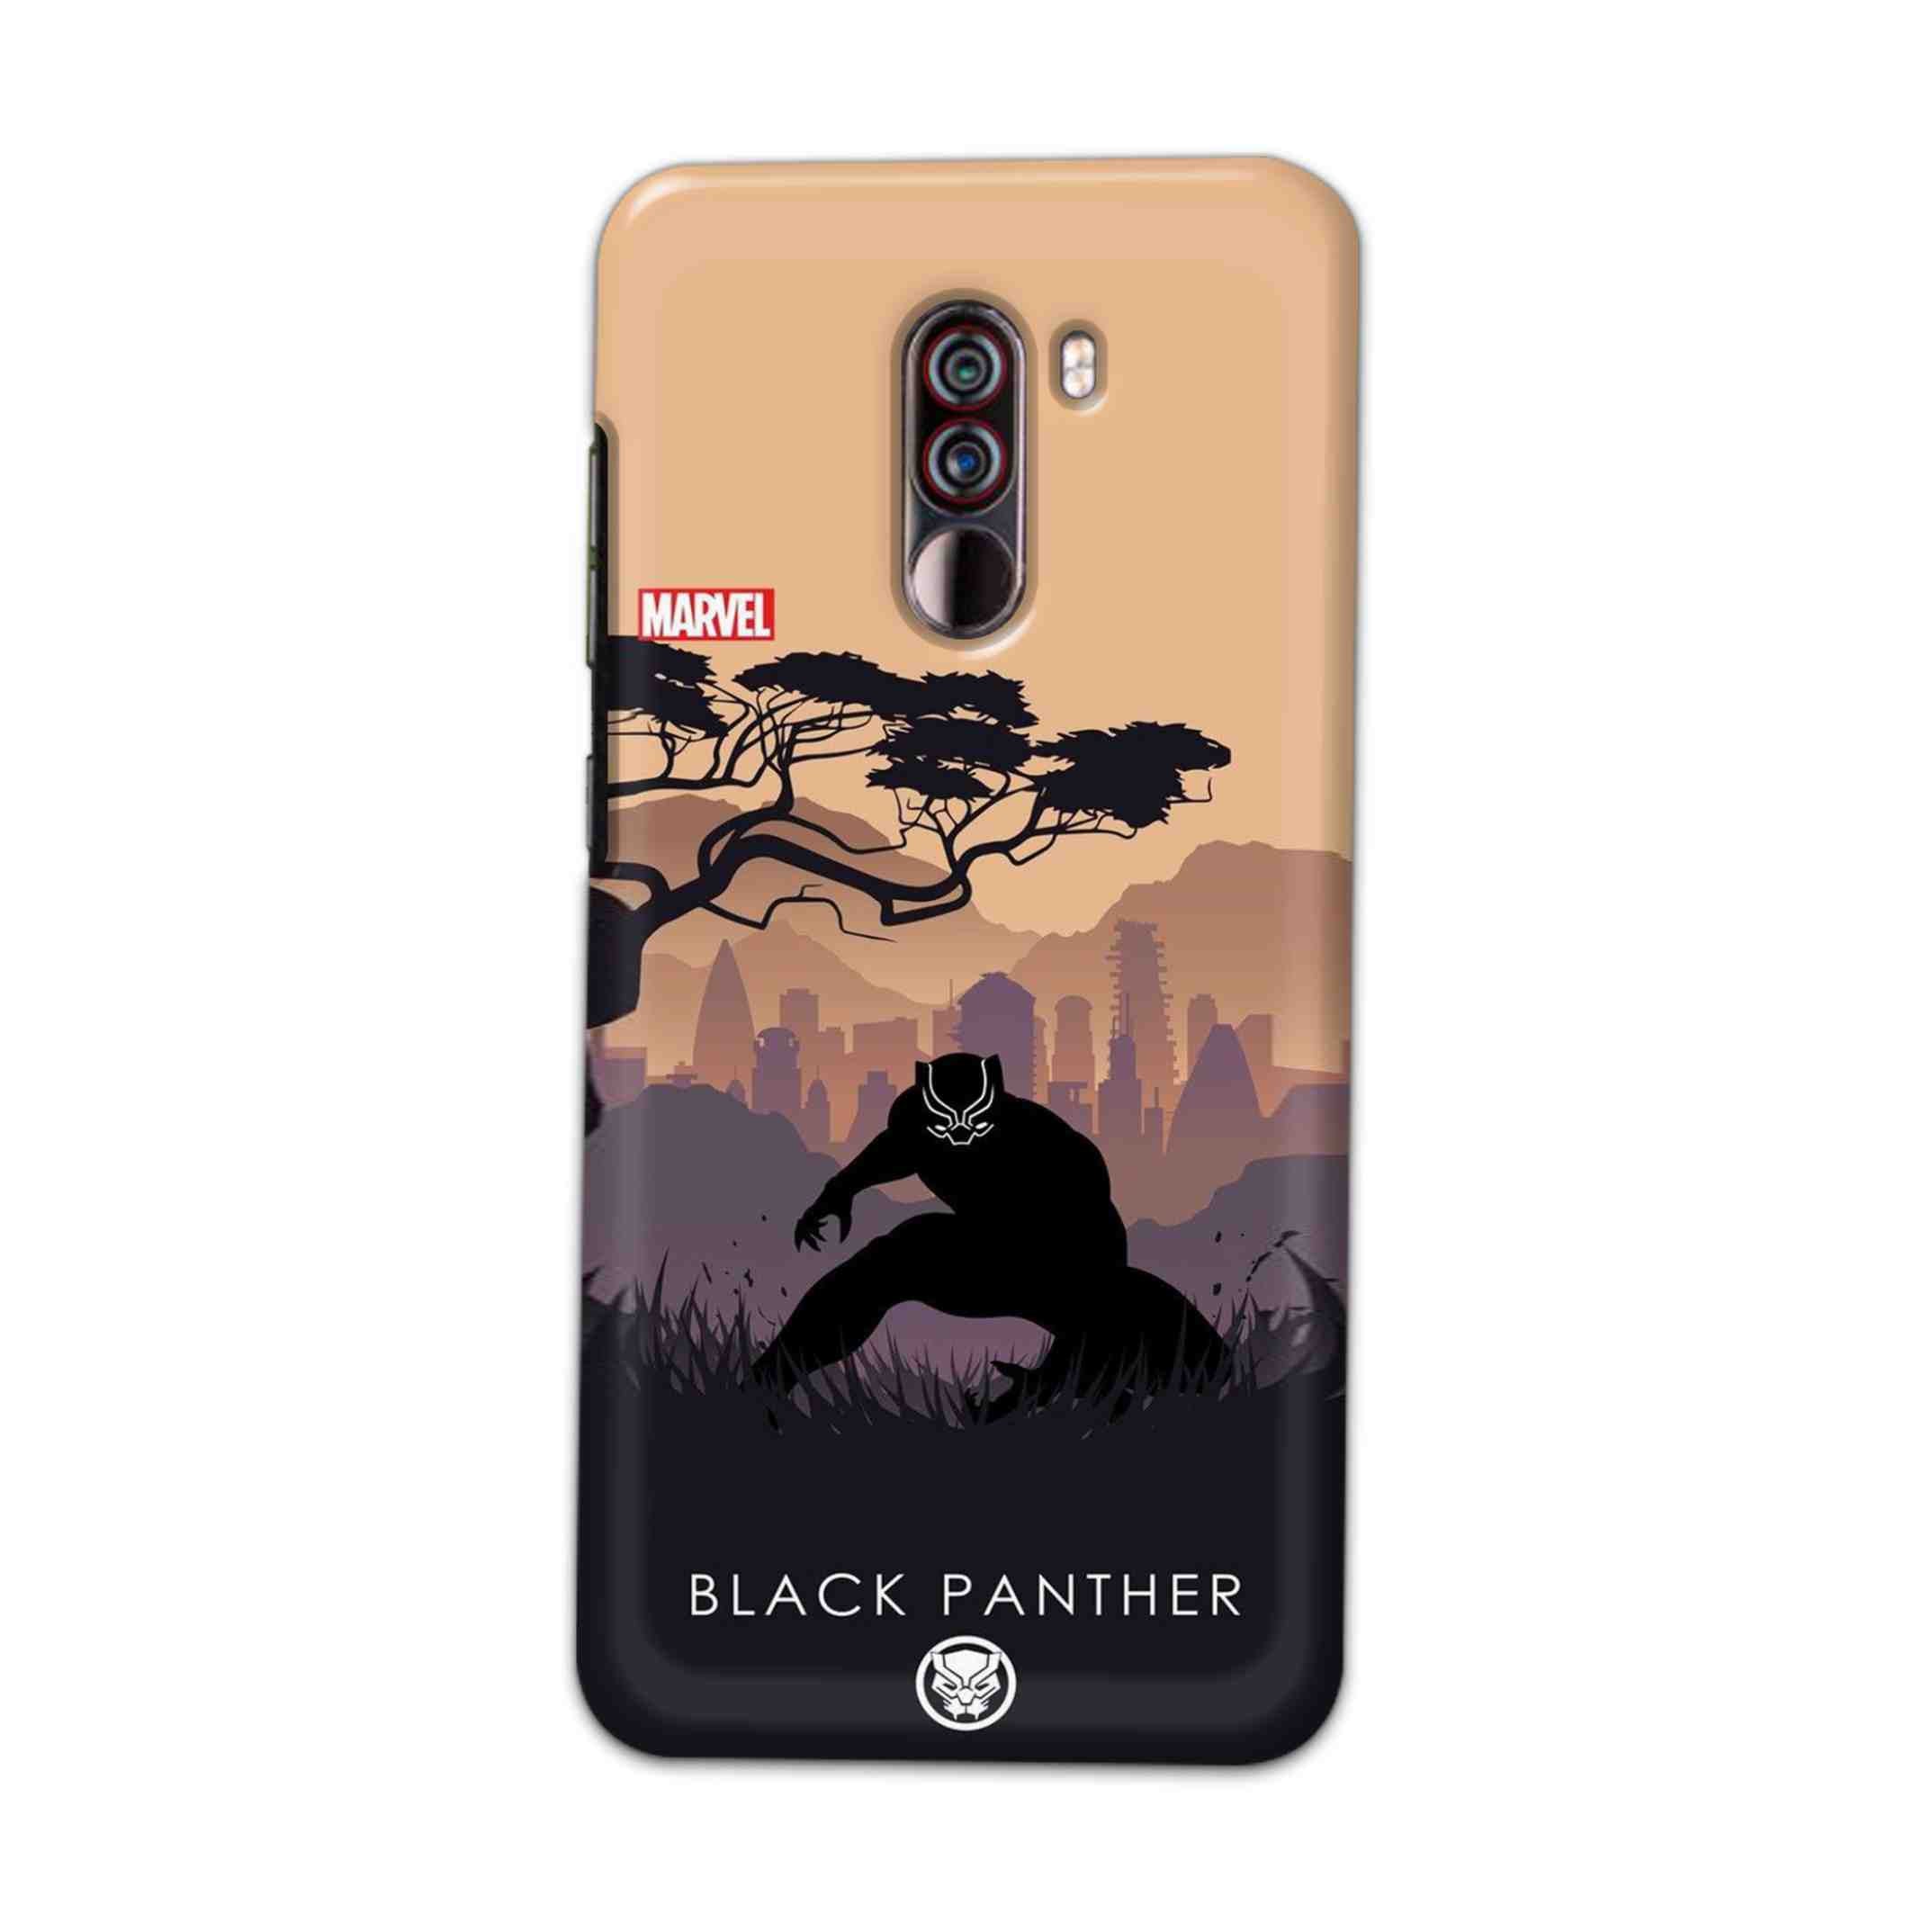 Buy  Black Panther Hard Back Mobile Phone Case Cover For Xiaomi Pocophone F1 Online